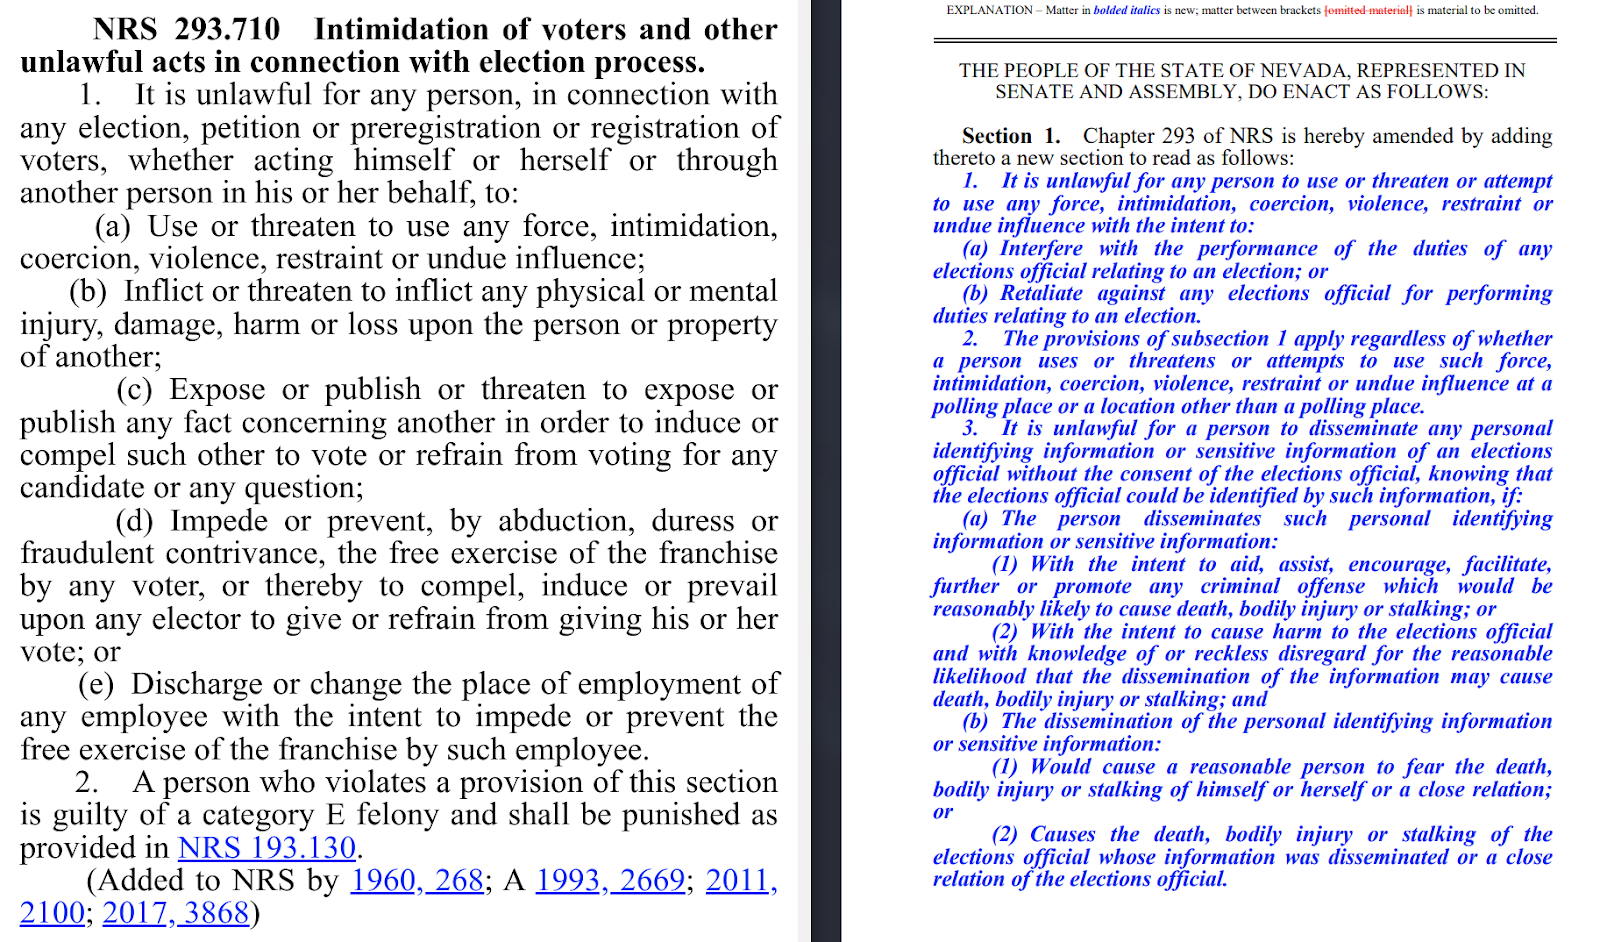 NRS 293.710 Intimidation of voters and other unlawful acts in connection with election process.